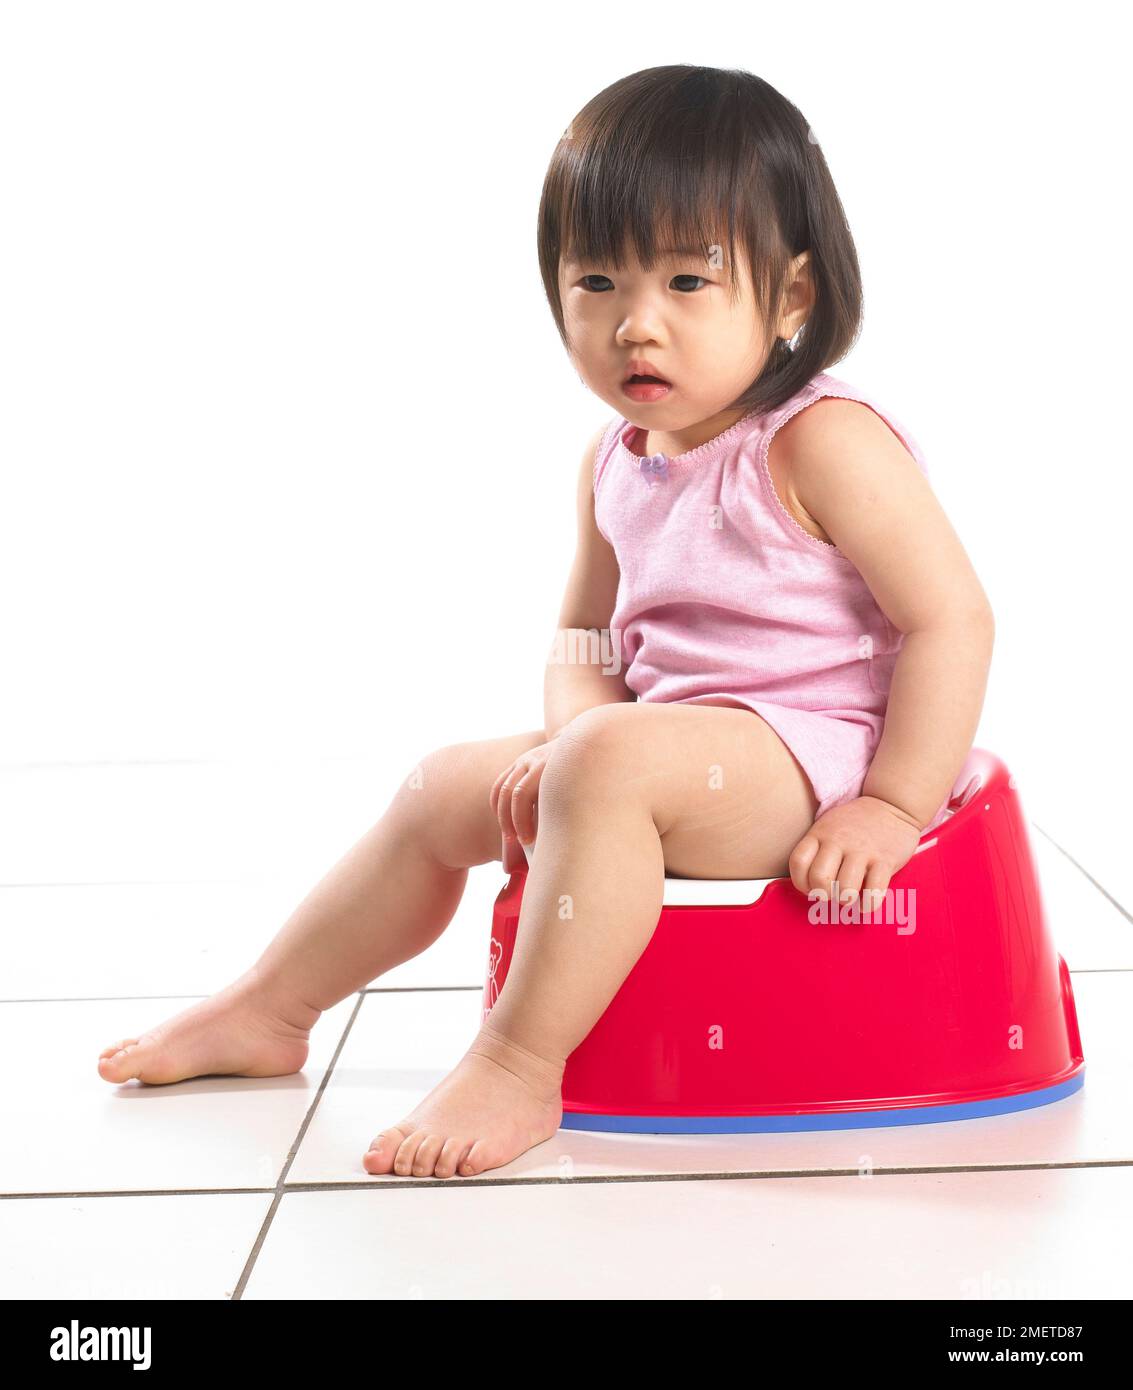 Girl wearing pink vest sitting on a red potty, 20 months Stock Photo ...